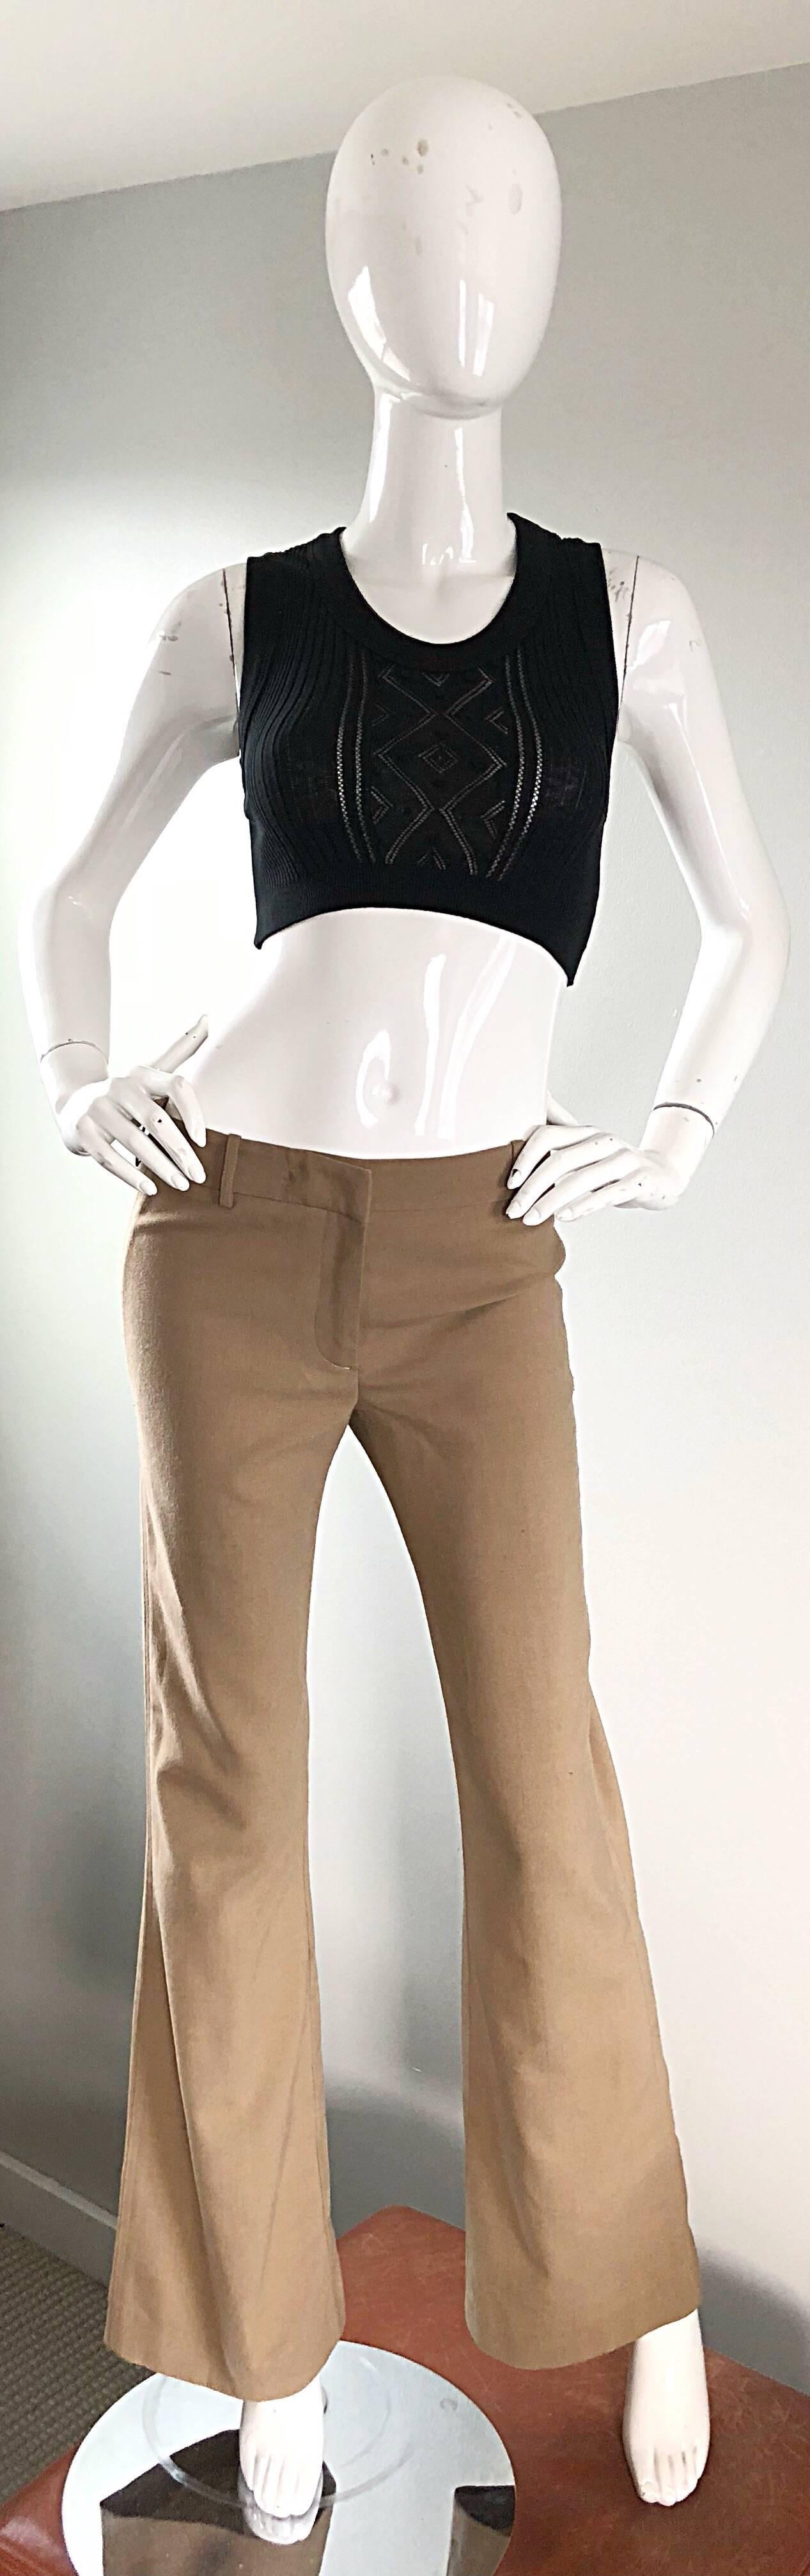 Super chic late 90s KATAYONE ADELI low rise wide flare leg virgin wool trousers! In the late 1990s and early 2000s Adeli was known for her superb fitting trousers. Barney's and Bergdorf Goodman could not keep them in stock, as the demand was so